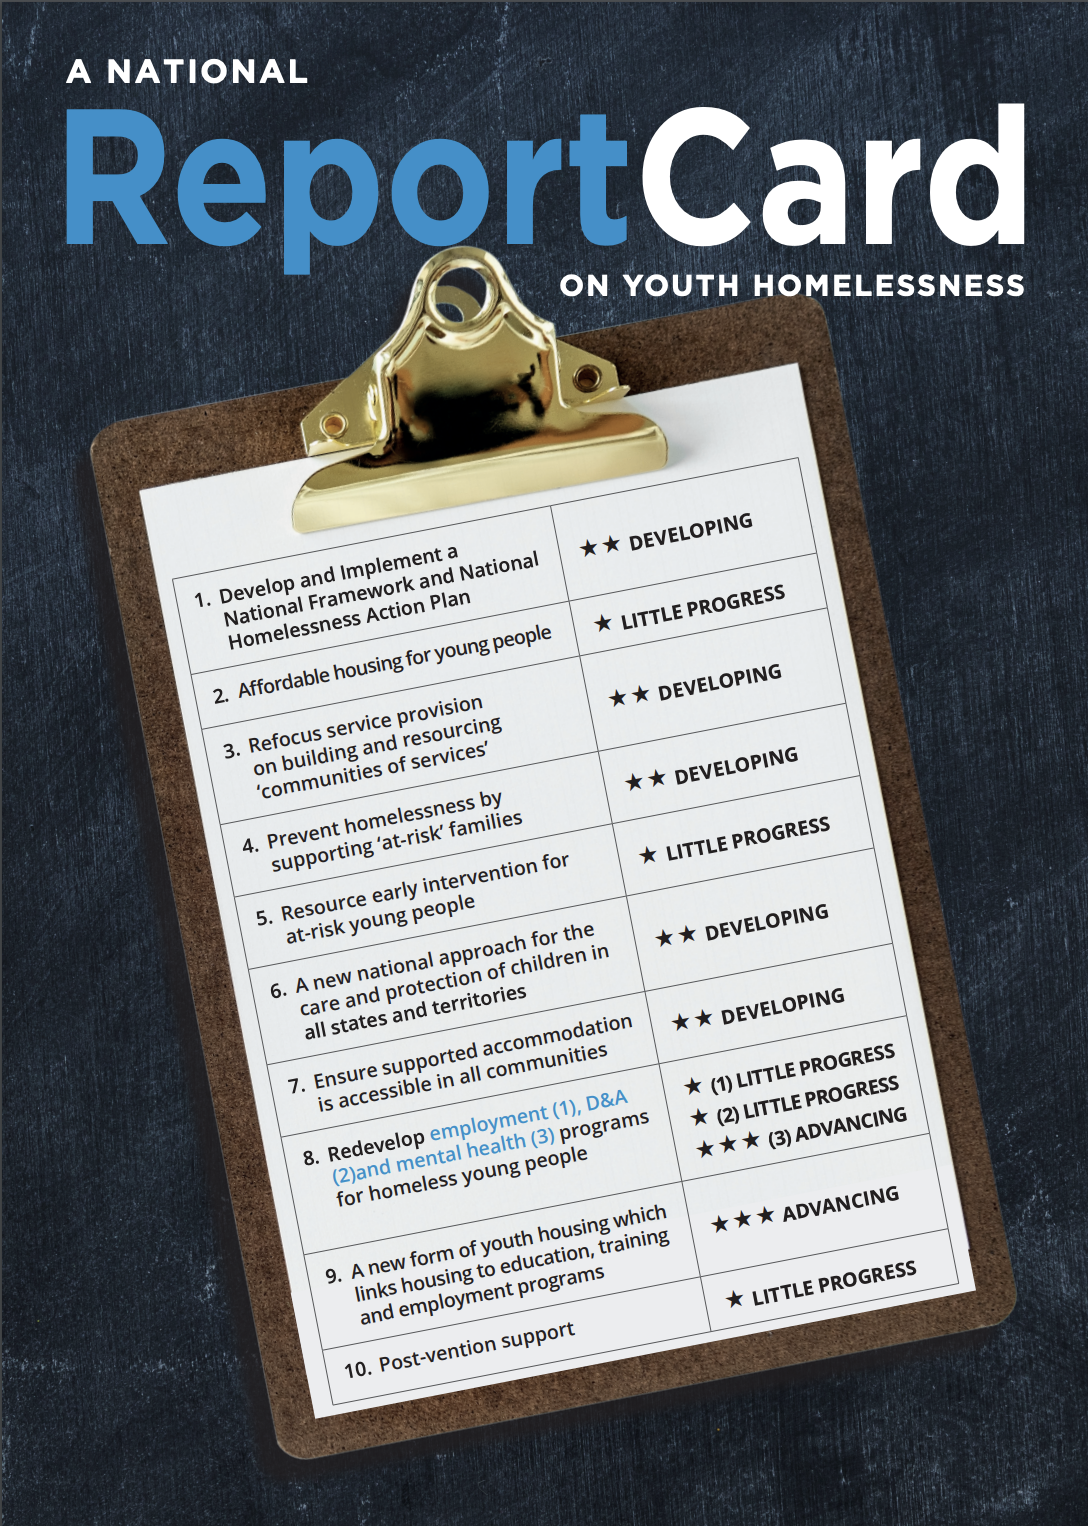 A National Report Card on Youth Homelessness in Australia